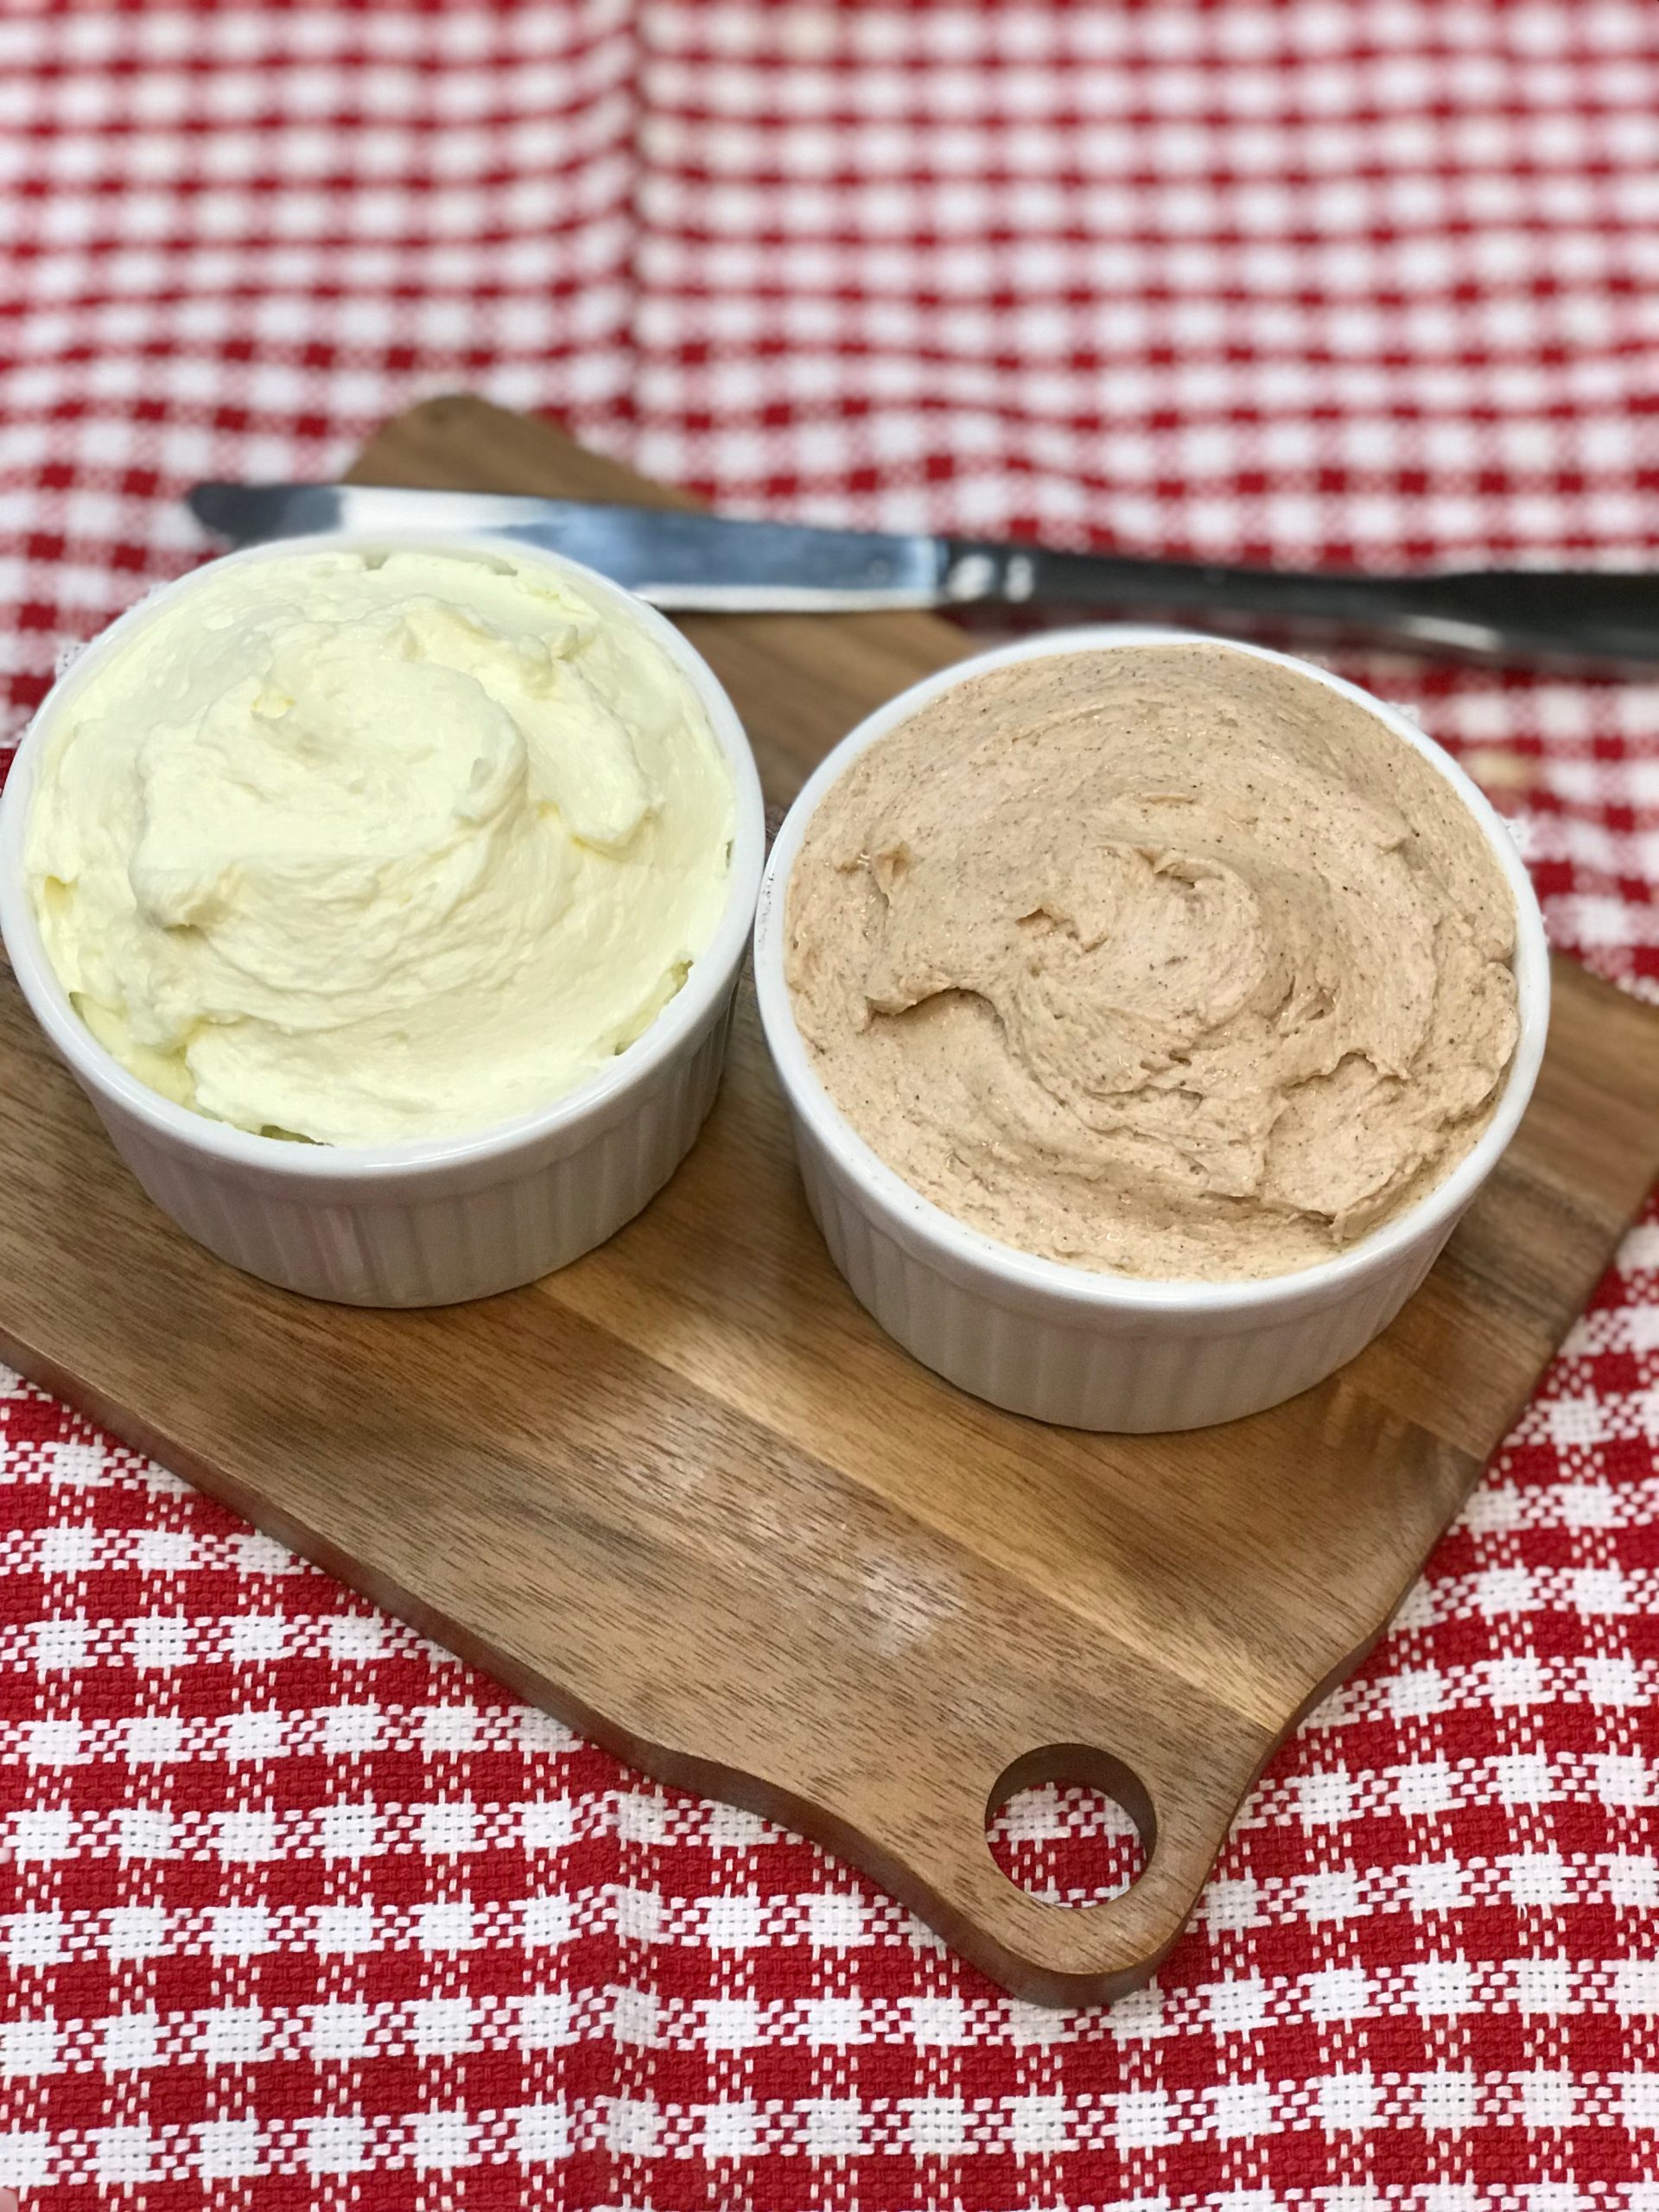 How to Make Ice Cream in a Food Processor